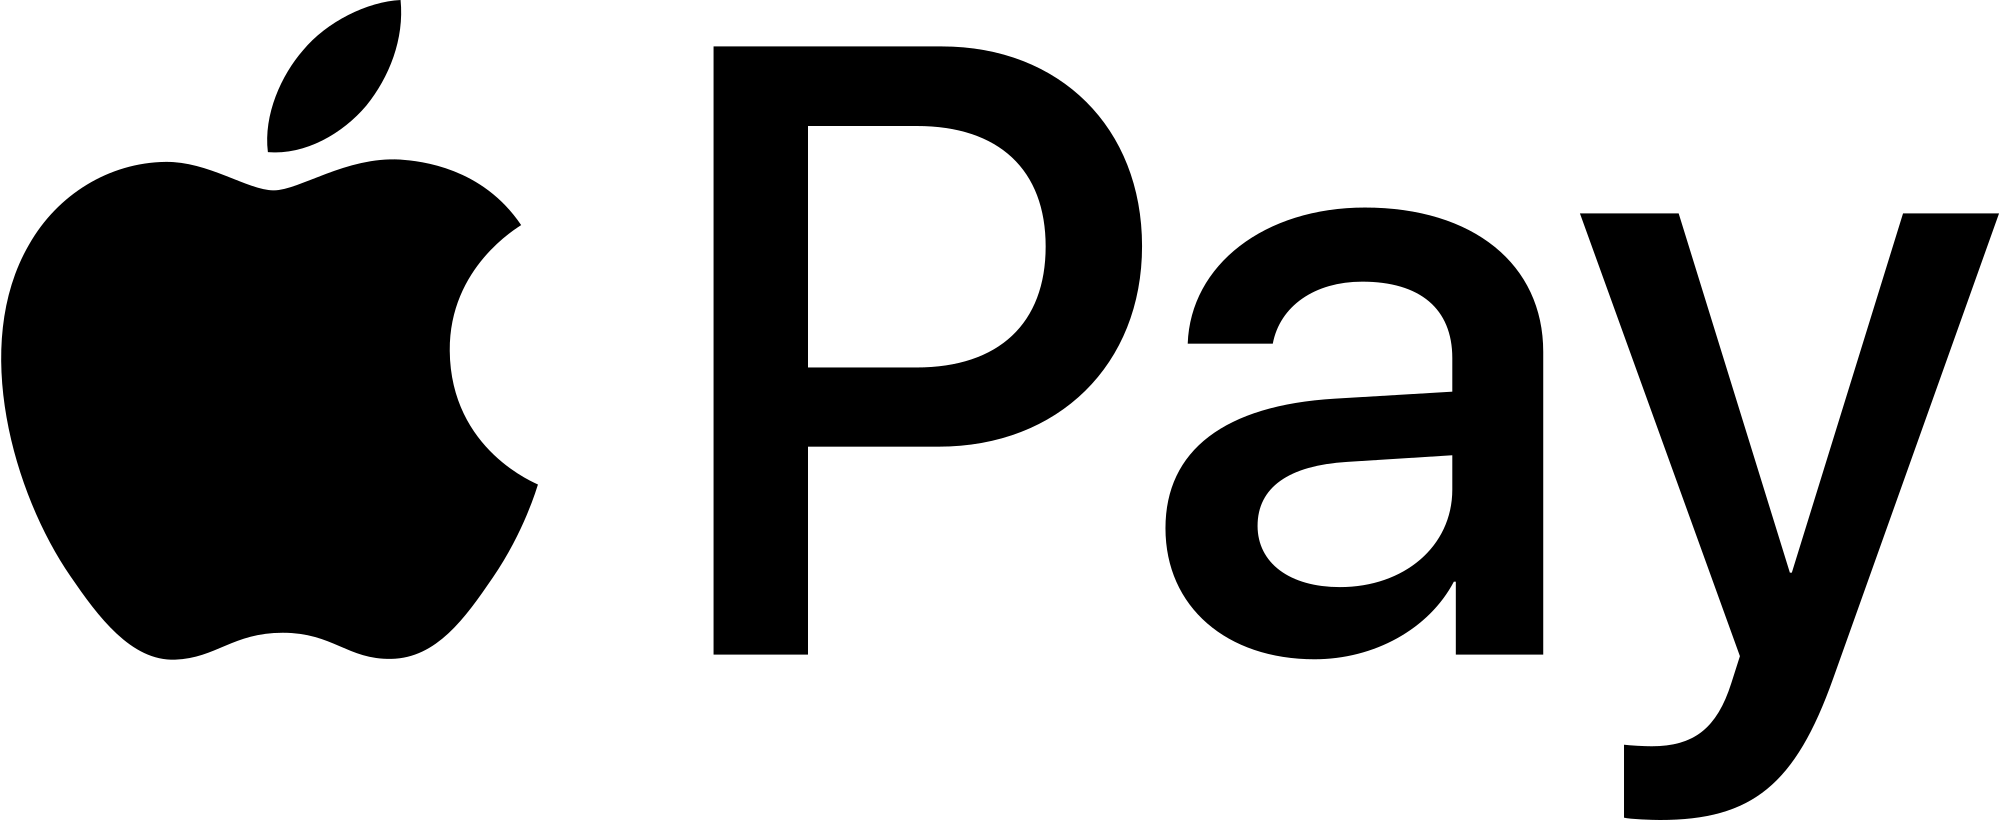 New Apple Pay Logo - File:Apple Pay logo.svg - Wikimedia Commons